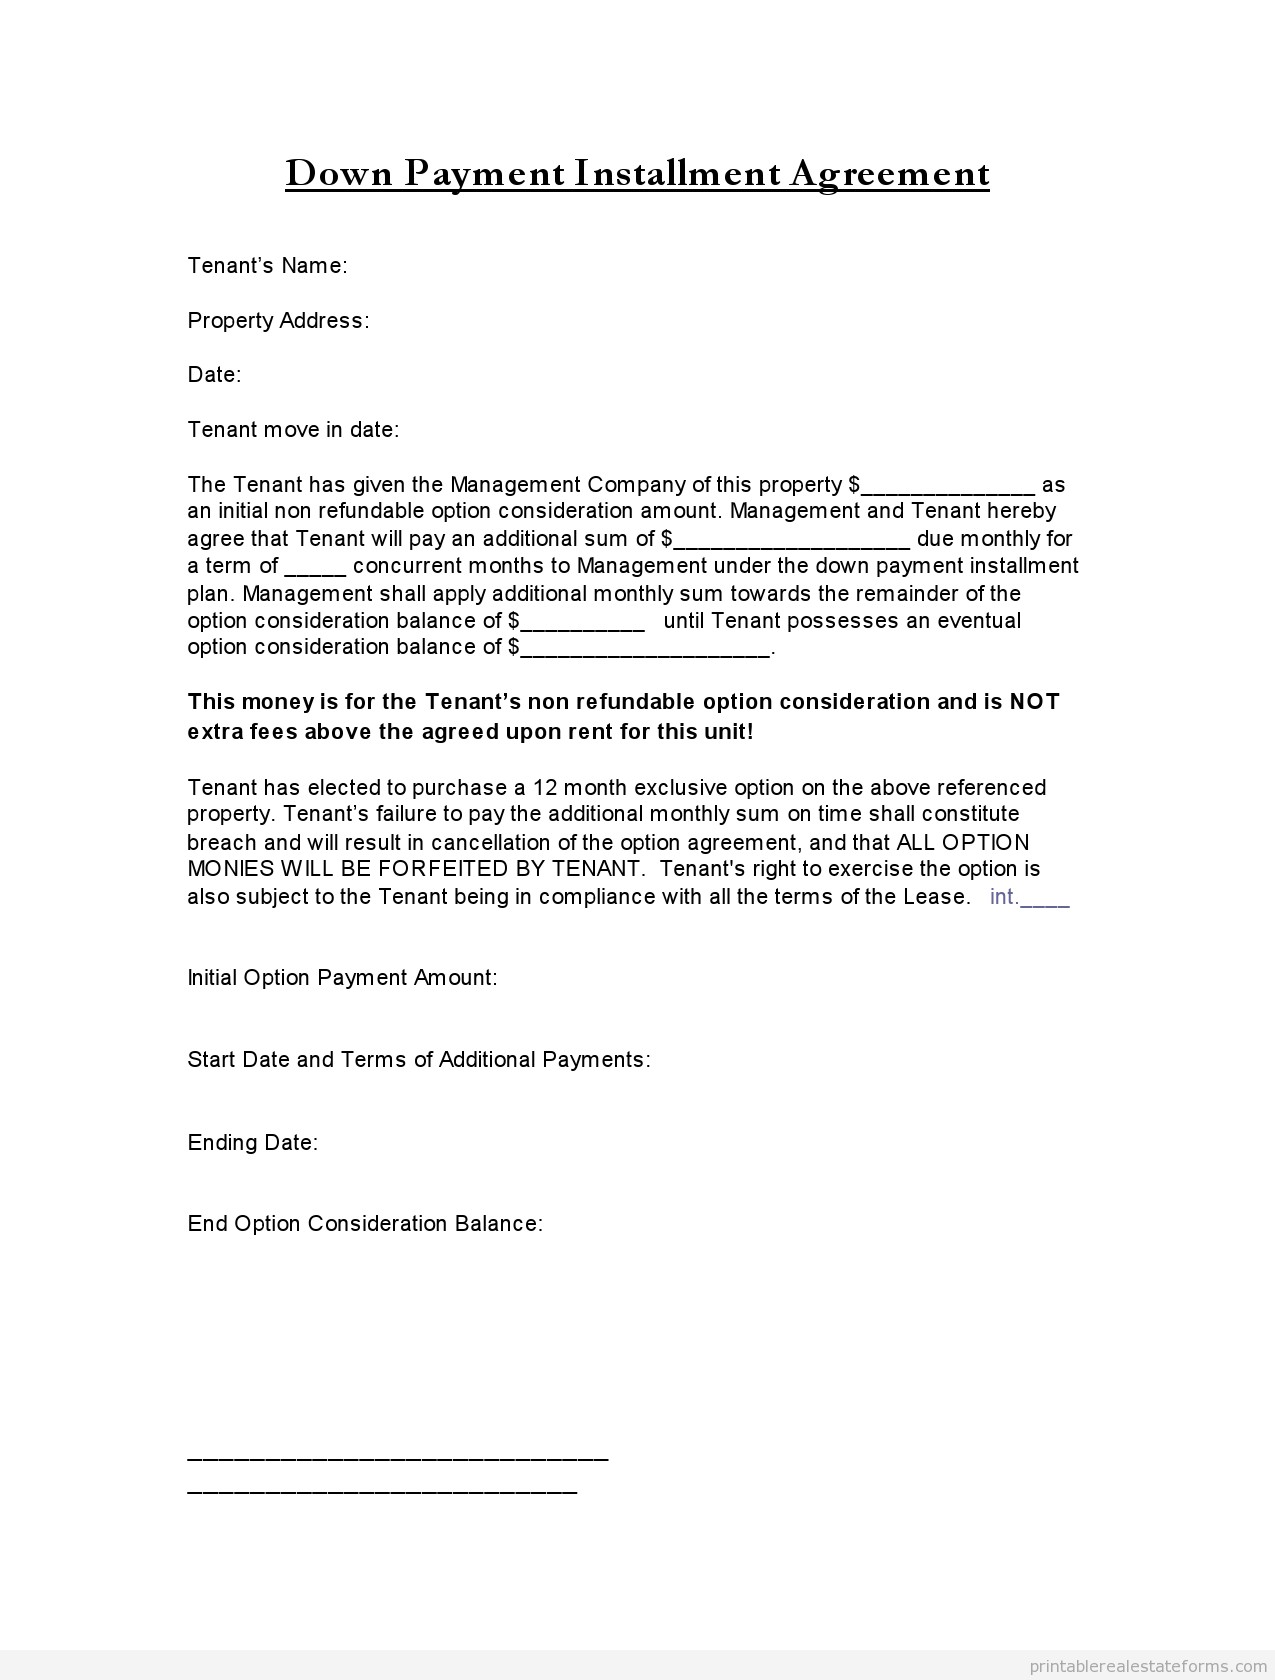 Sample Printable Down Payment Installment Agreement 2 Form Document Contract Template